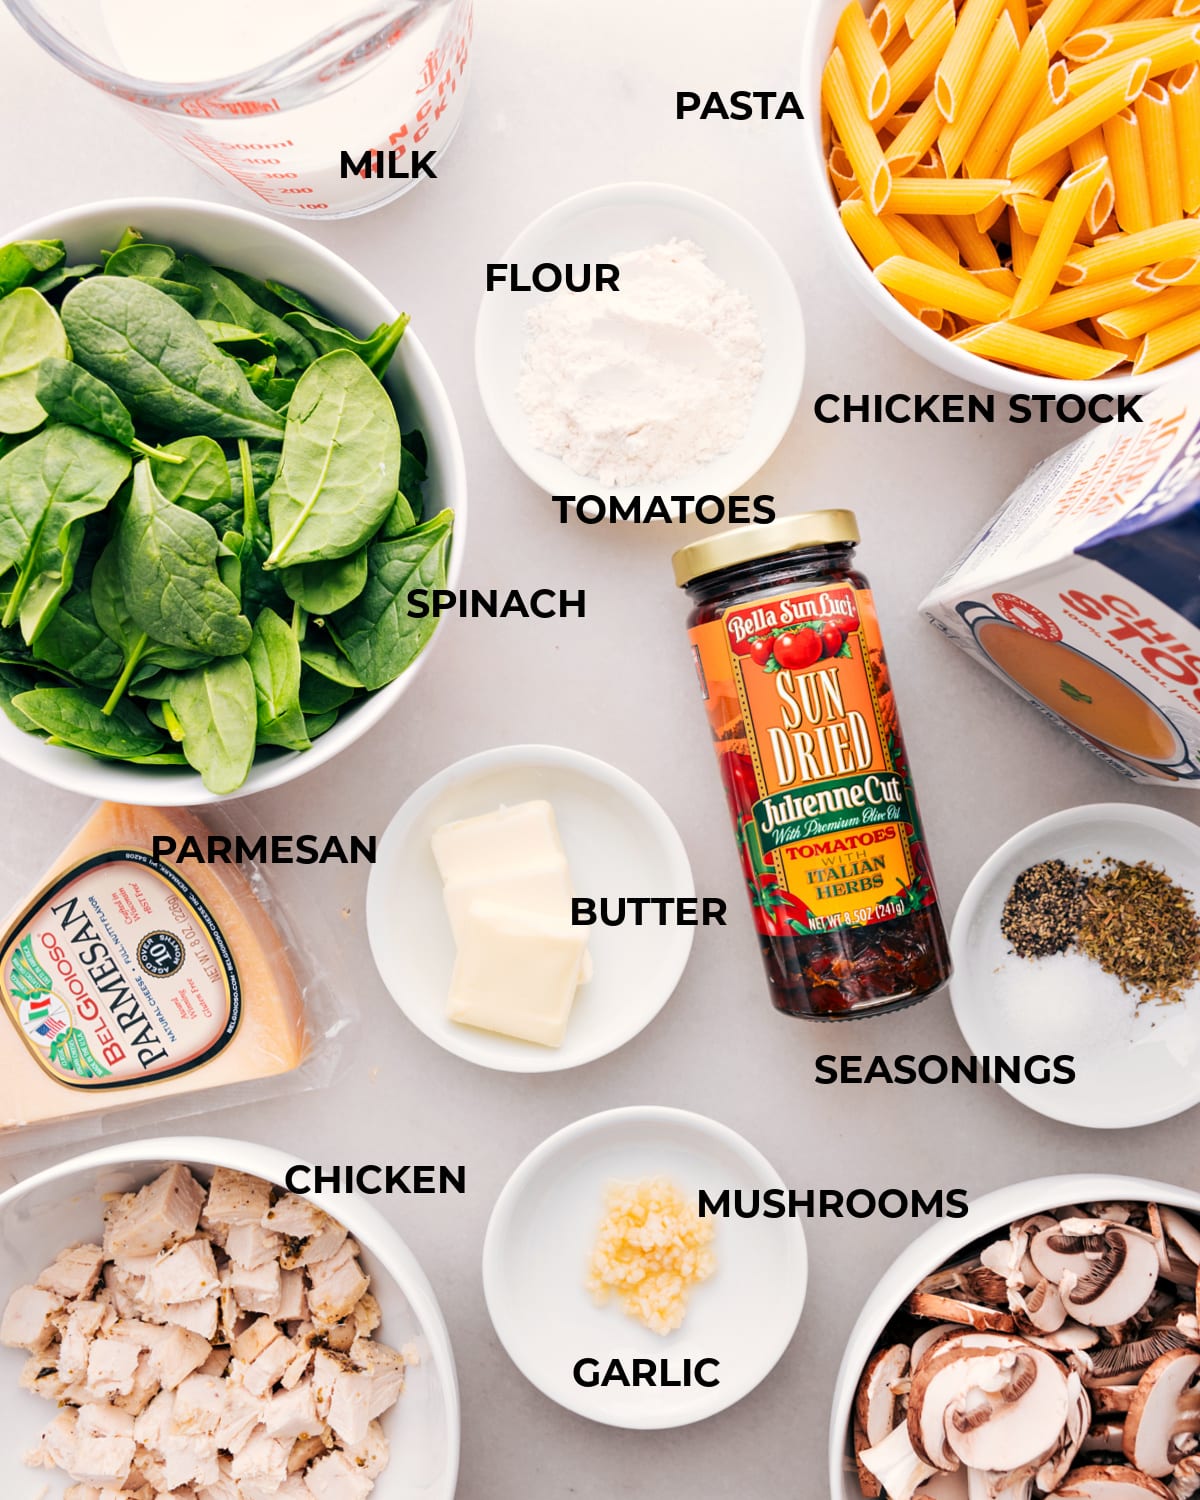 Ingredients for Chicken Penne Pasta, including measured portions of chicken, penne, cheese, sun-dried tomatoes, mushrooms and spinach, are neatly laid out.